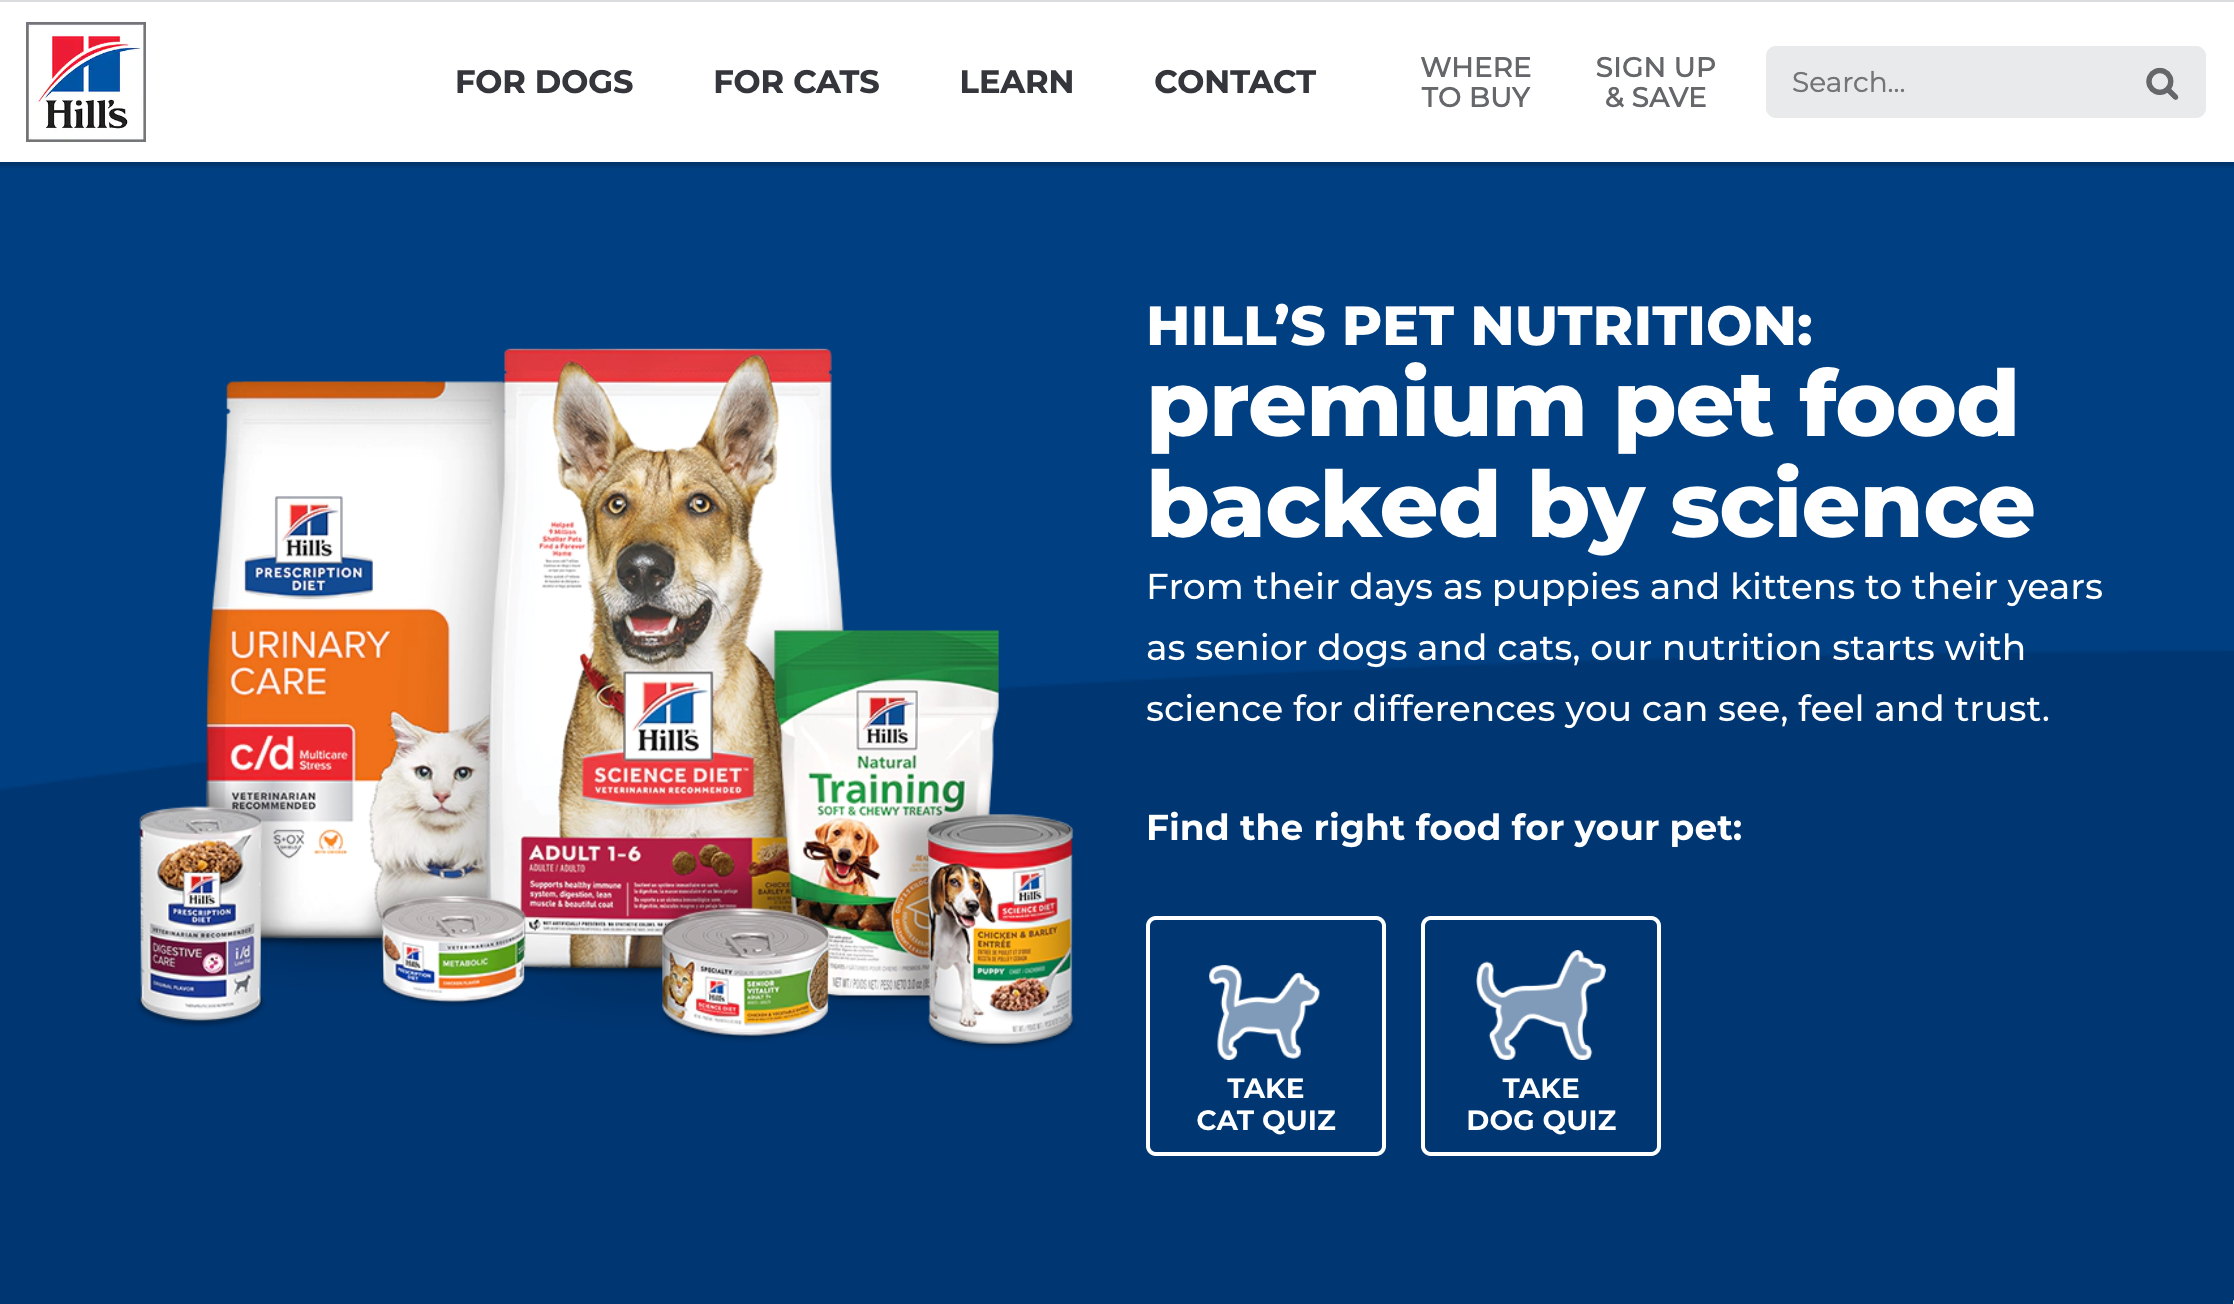 Hill's Pet featured image